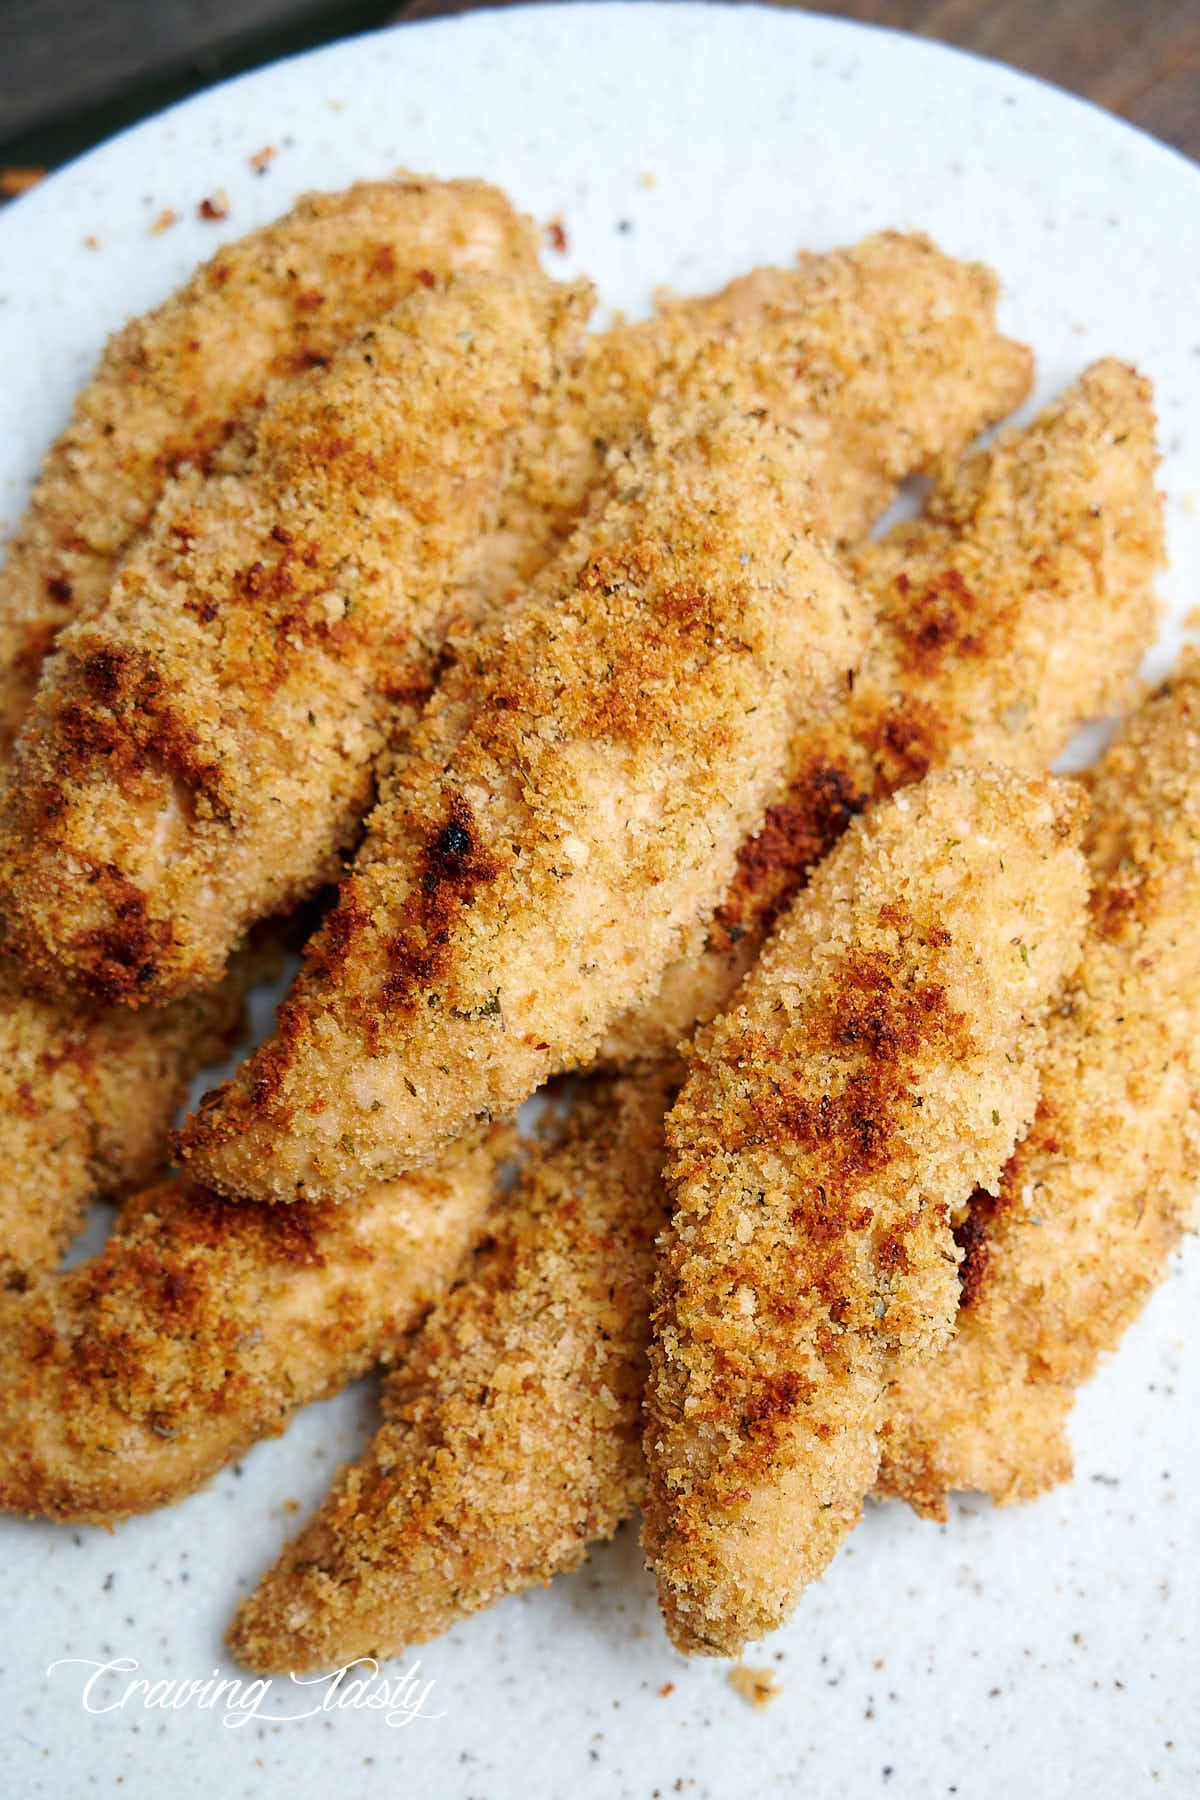 Golden brown, crispy chicken tenders on a speckled plate.